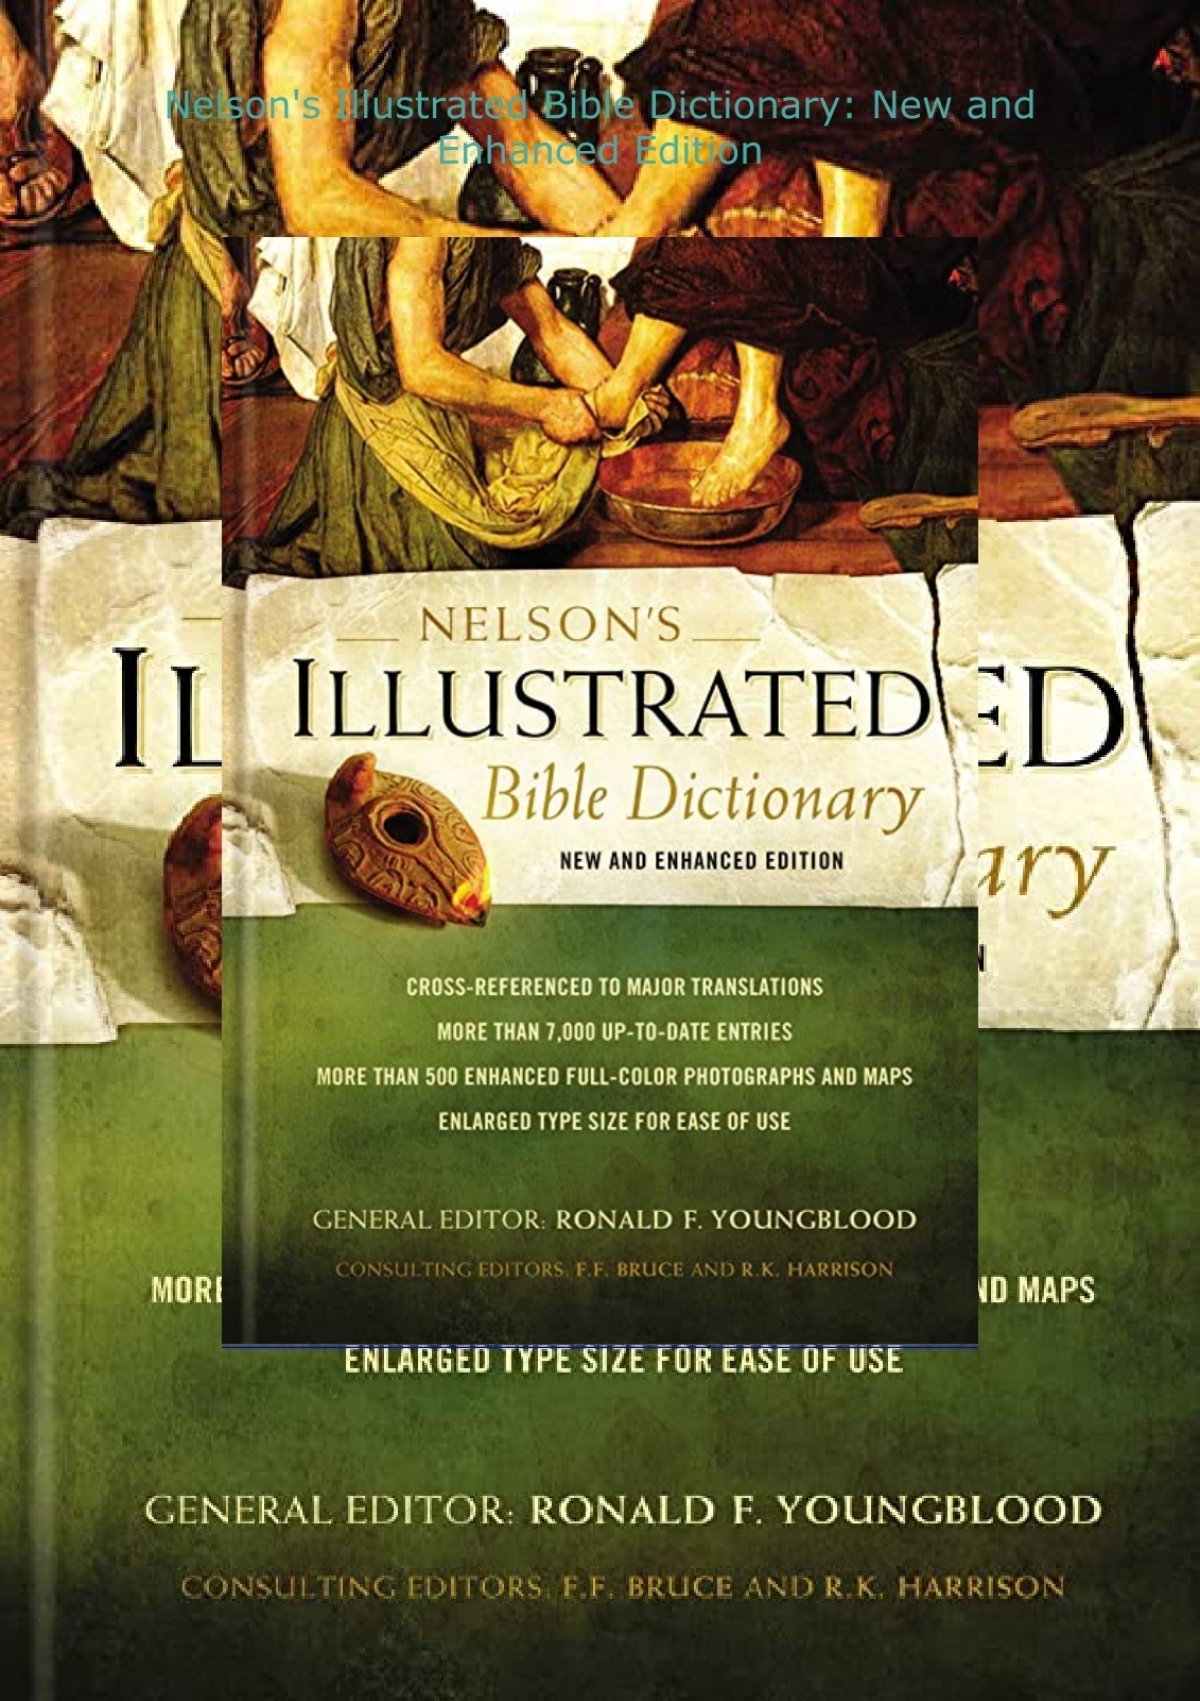 nelsons illustrated bible dictionary download